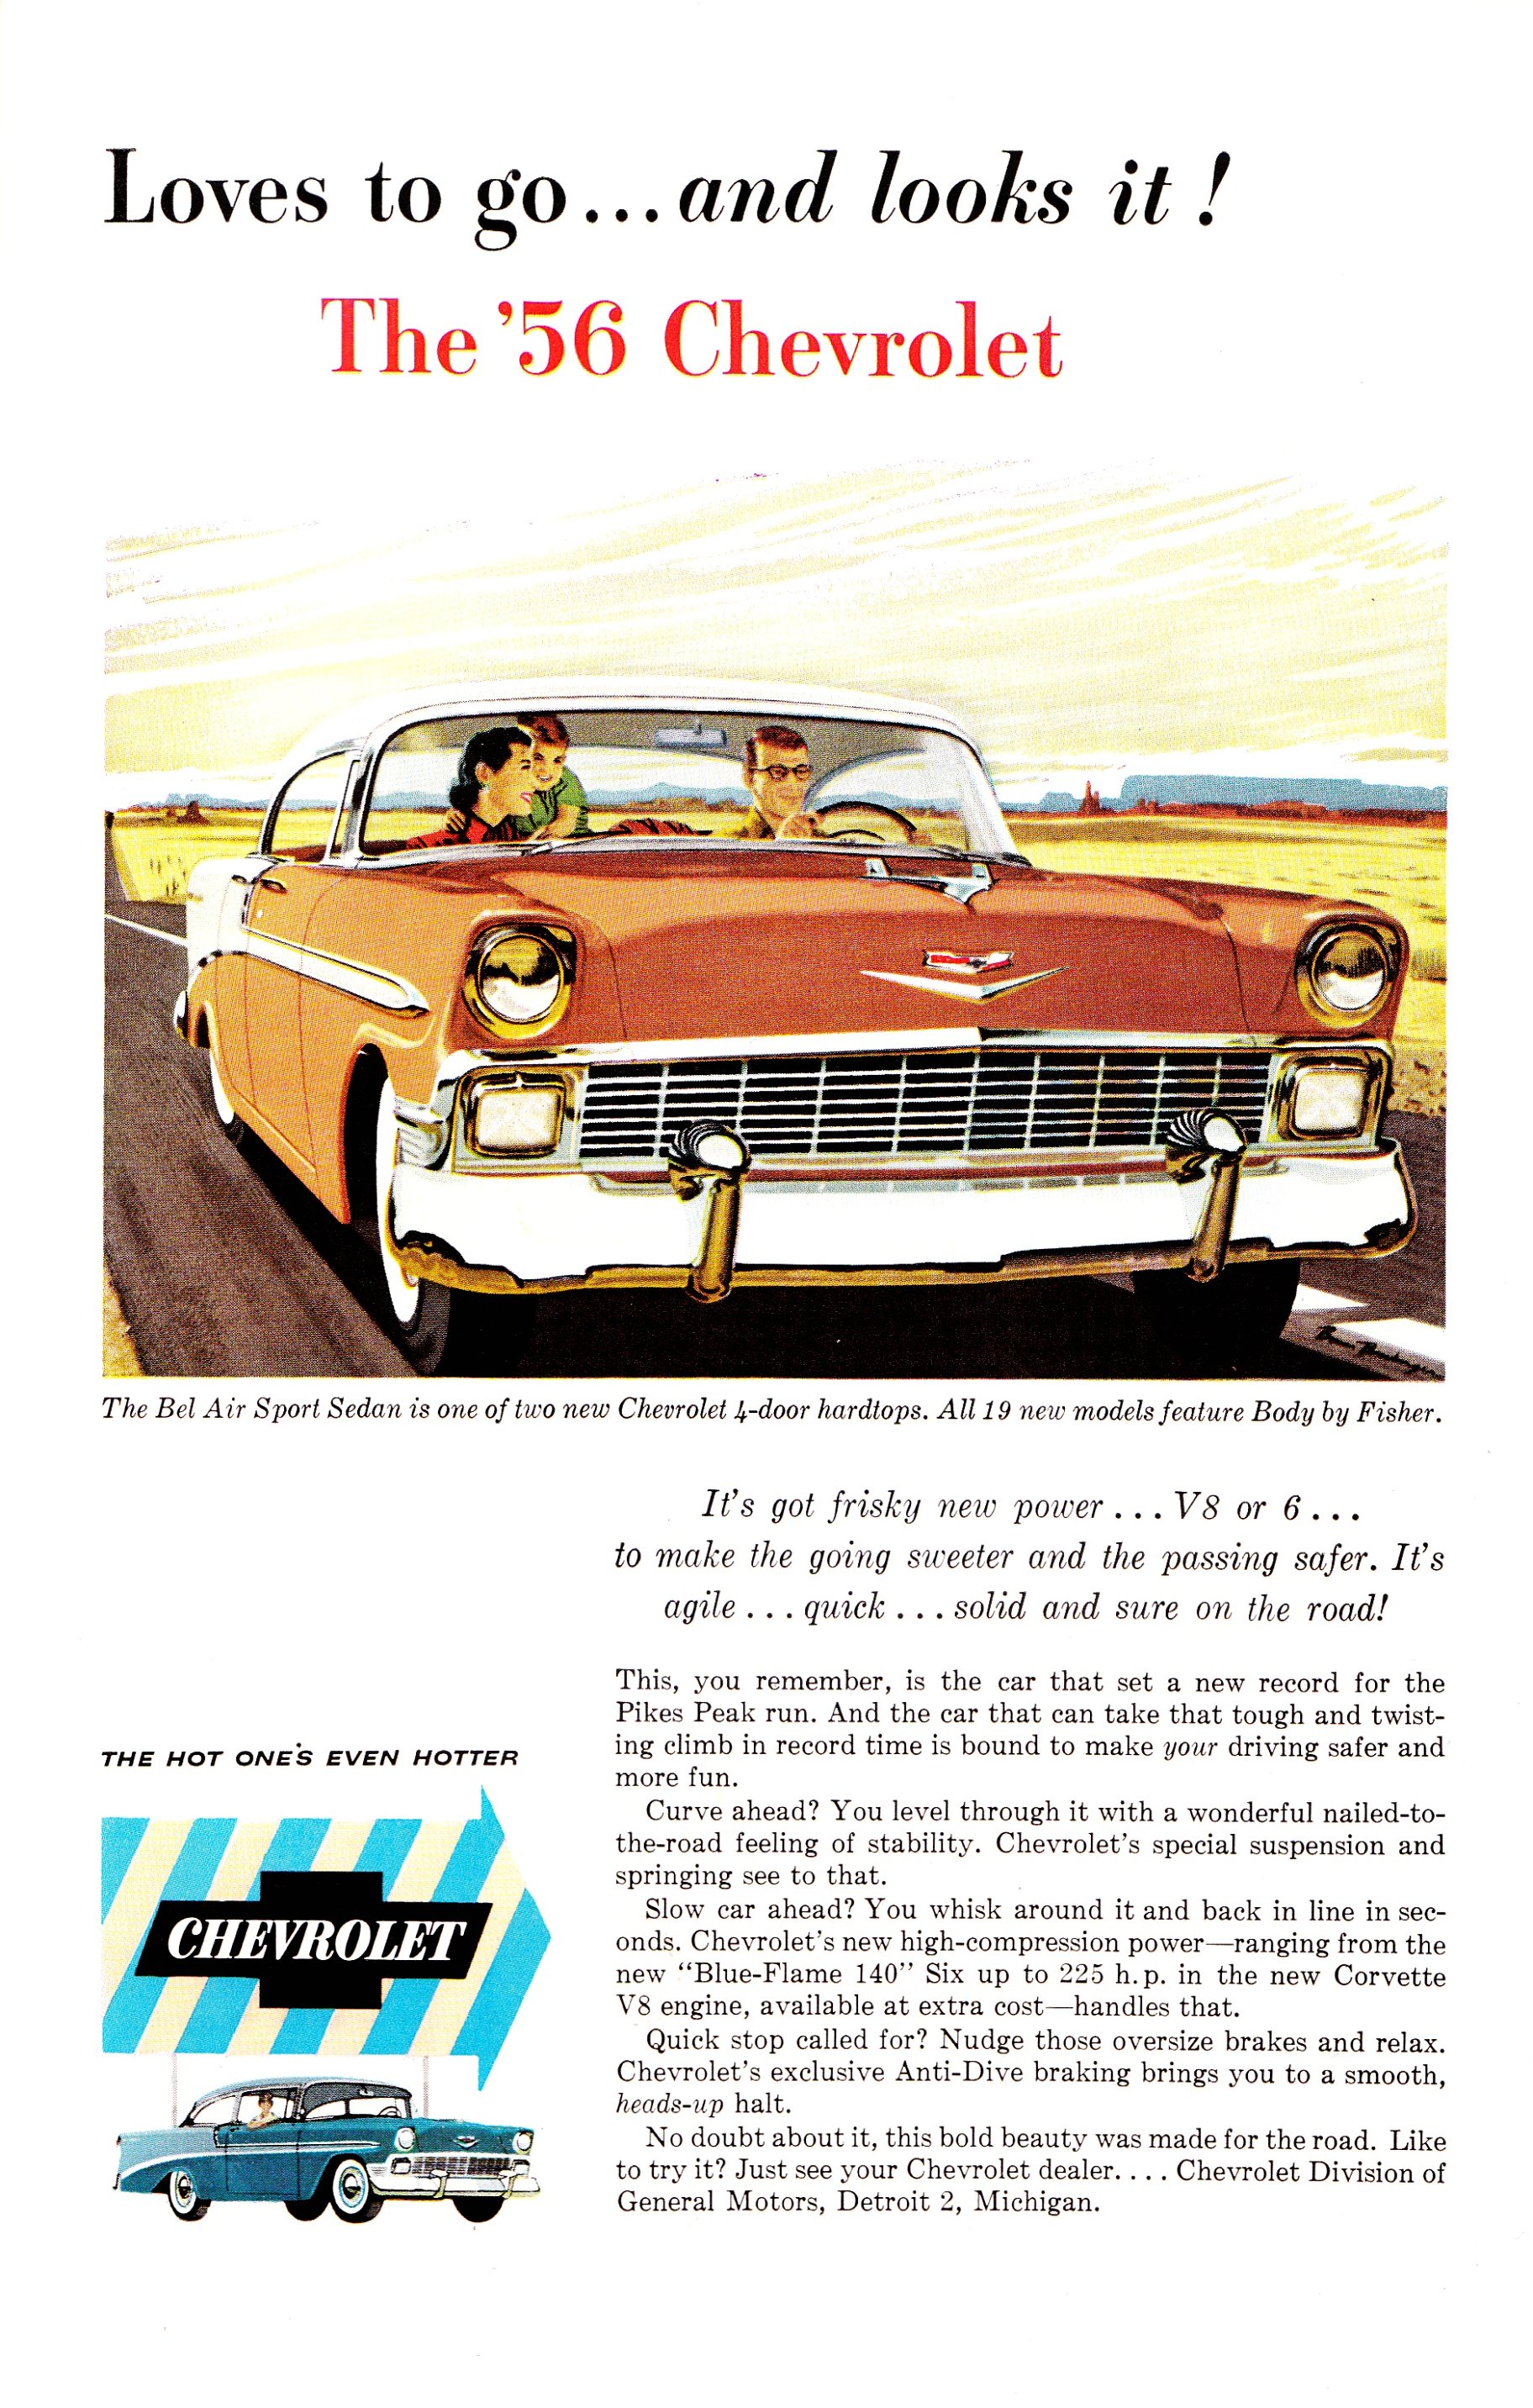 1956 Chevrolet Bel Air Sport Sedan - published in National Geographic - March 1956